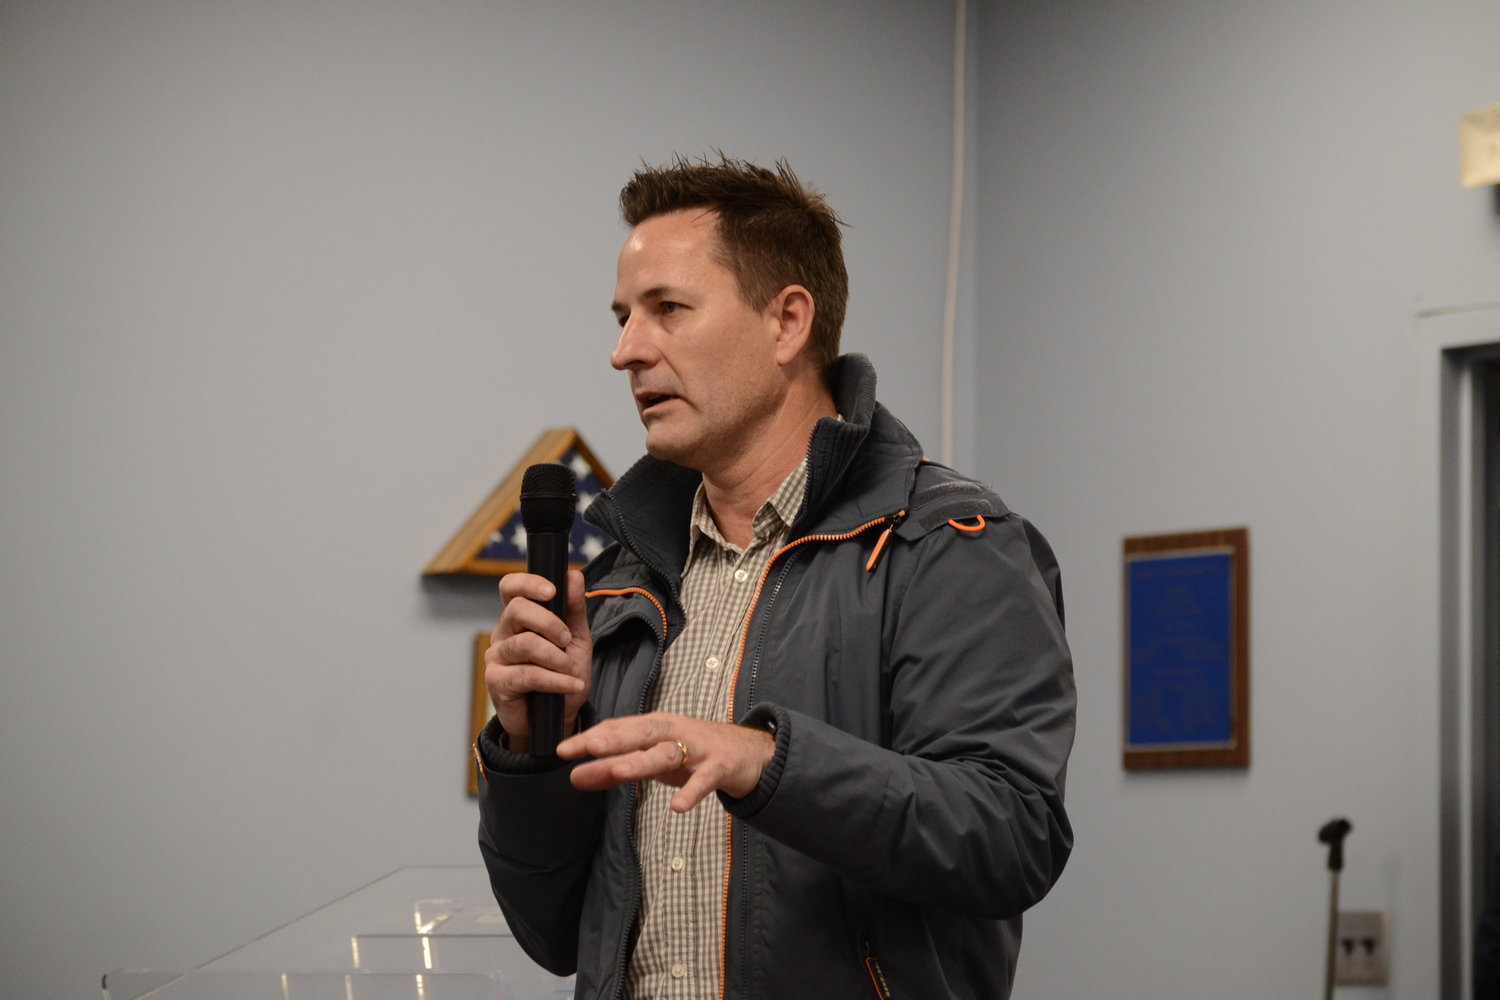 Andrew Naperotic, Principal and co-founder of Addaspace, addresses a full crowd at Warren Town Hall during a public meeting back in March, where dozens of residents spoke out against the initial design concept of the project.